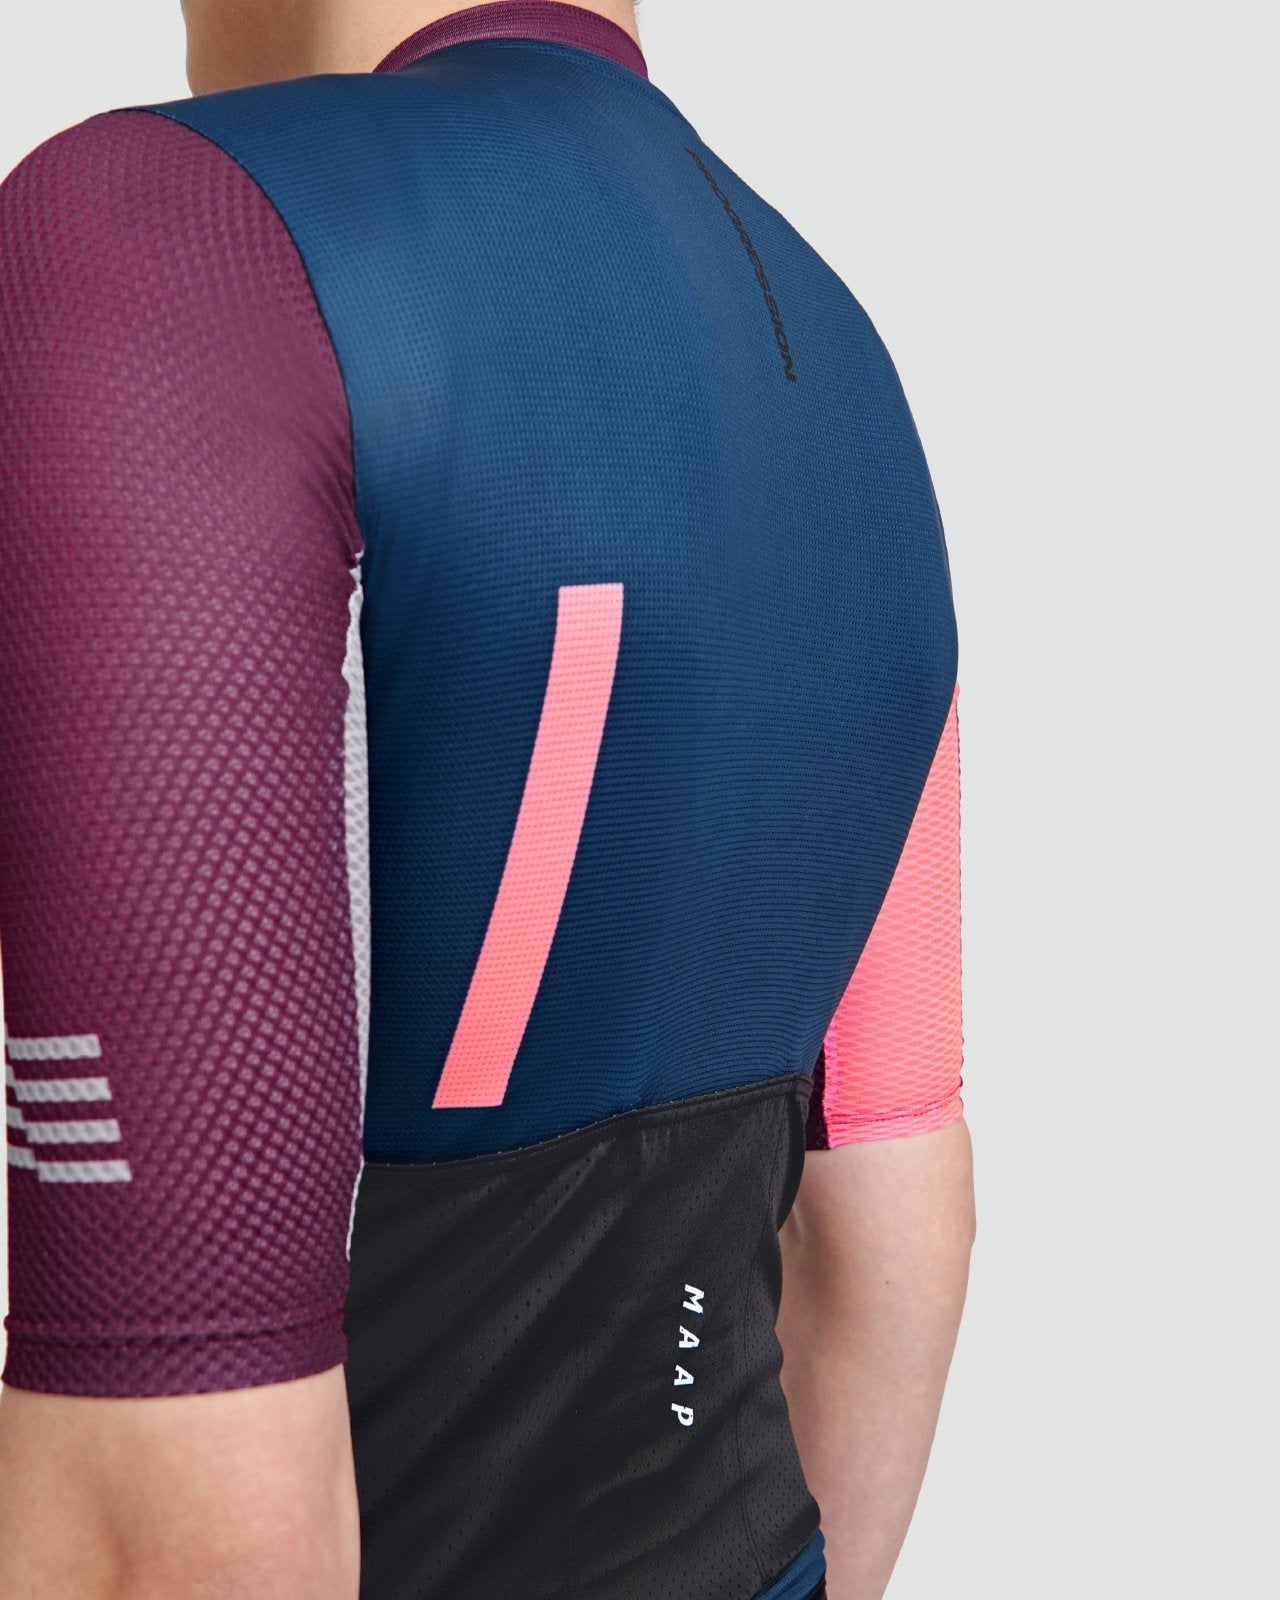 Voyage Pro Air Jersey - MAAP Cycling Apparel